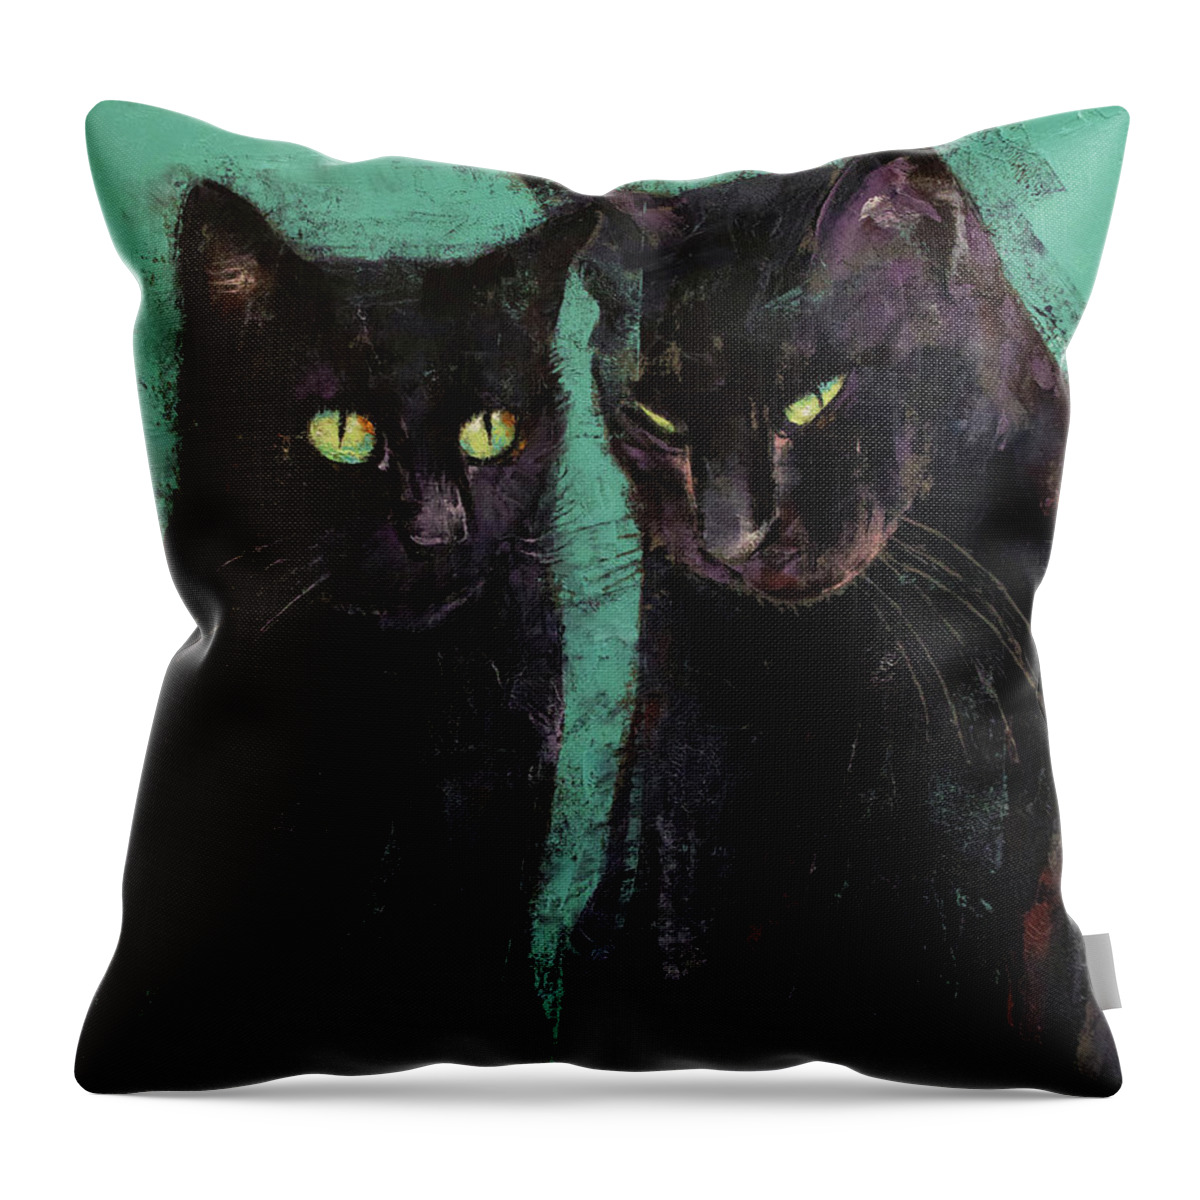 Abstract Throw Pillow featuring the painting Two Black Cats by Michael Creese